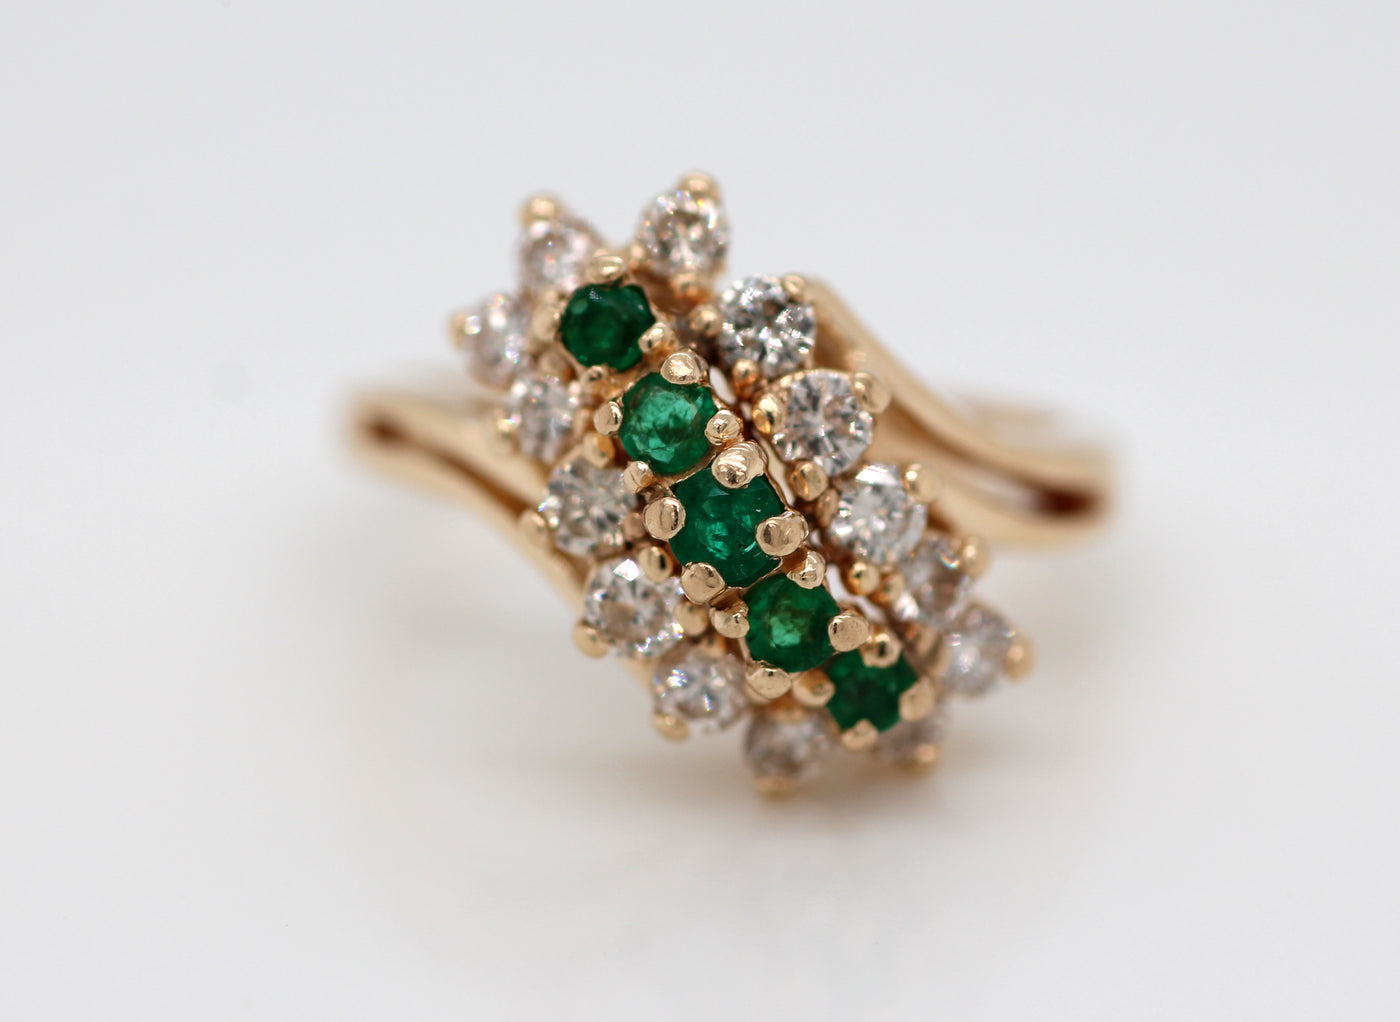 ESTATE 14KY .24 CTTW EMERALD AND DIAMOND RING .56 CTTW LM-SI1